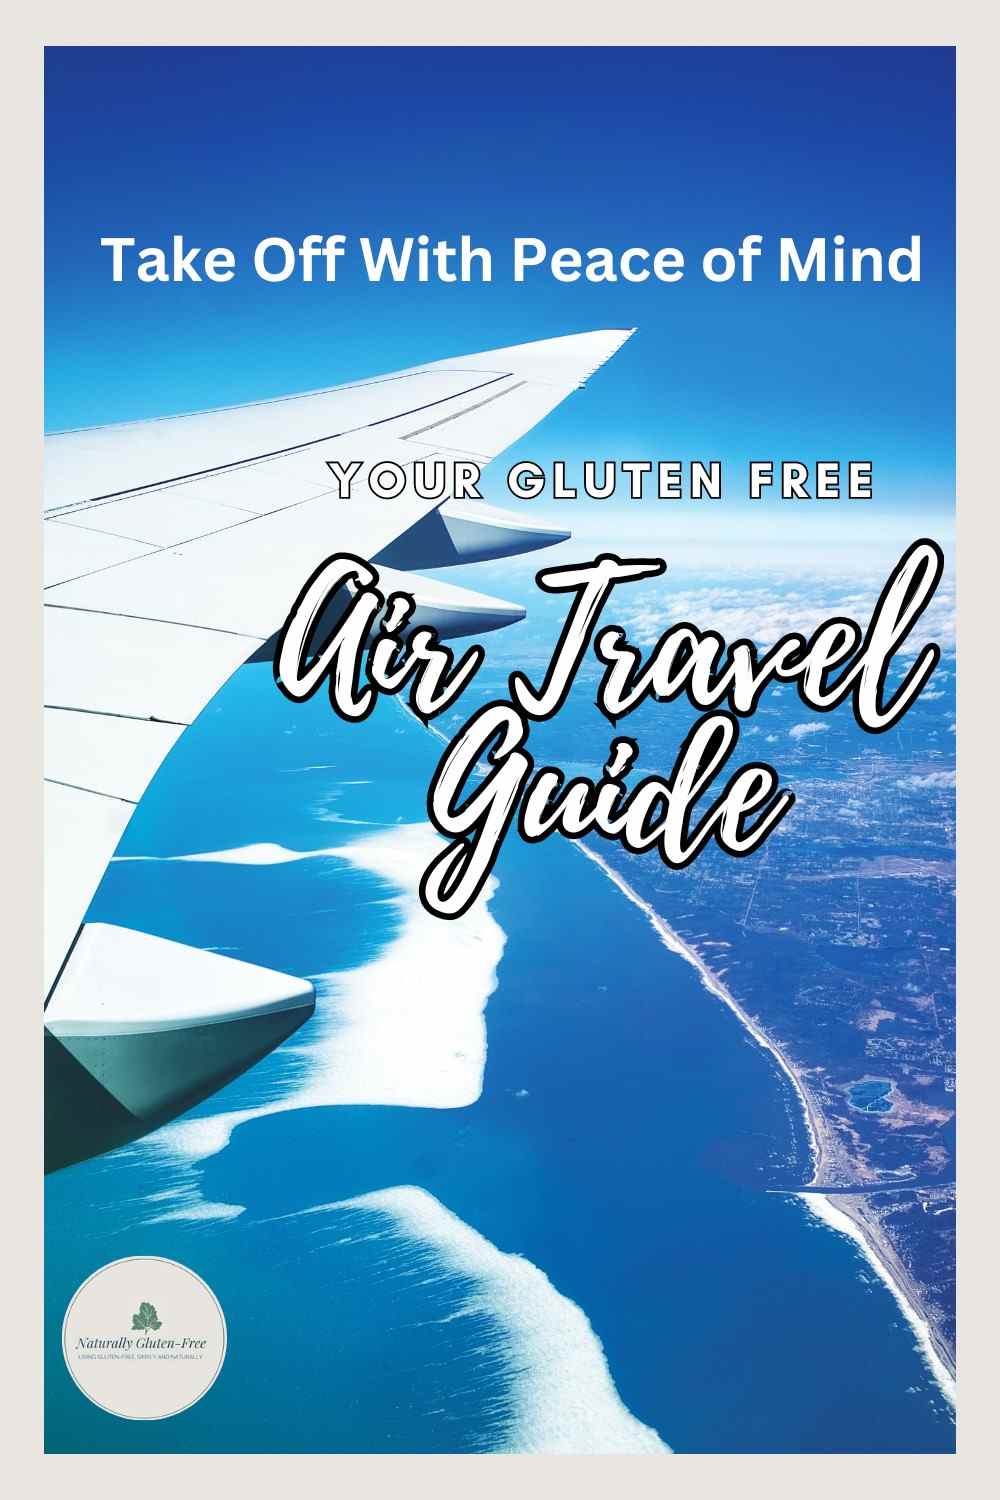 Pin Image - gluten free travel guide. Airplane wing over land and blue sky.